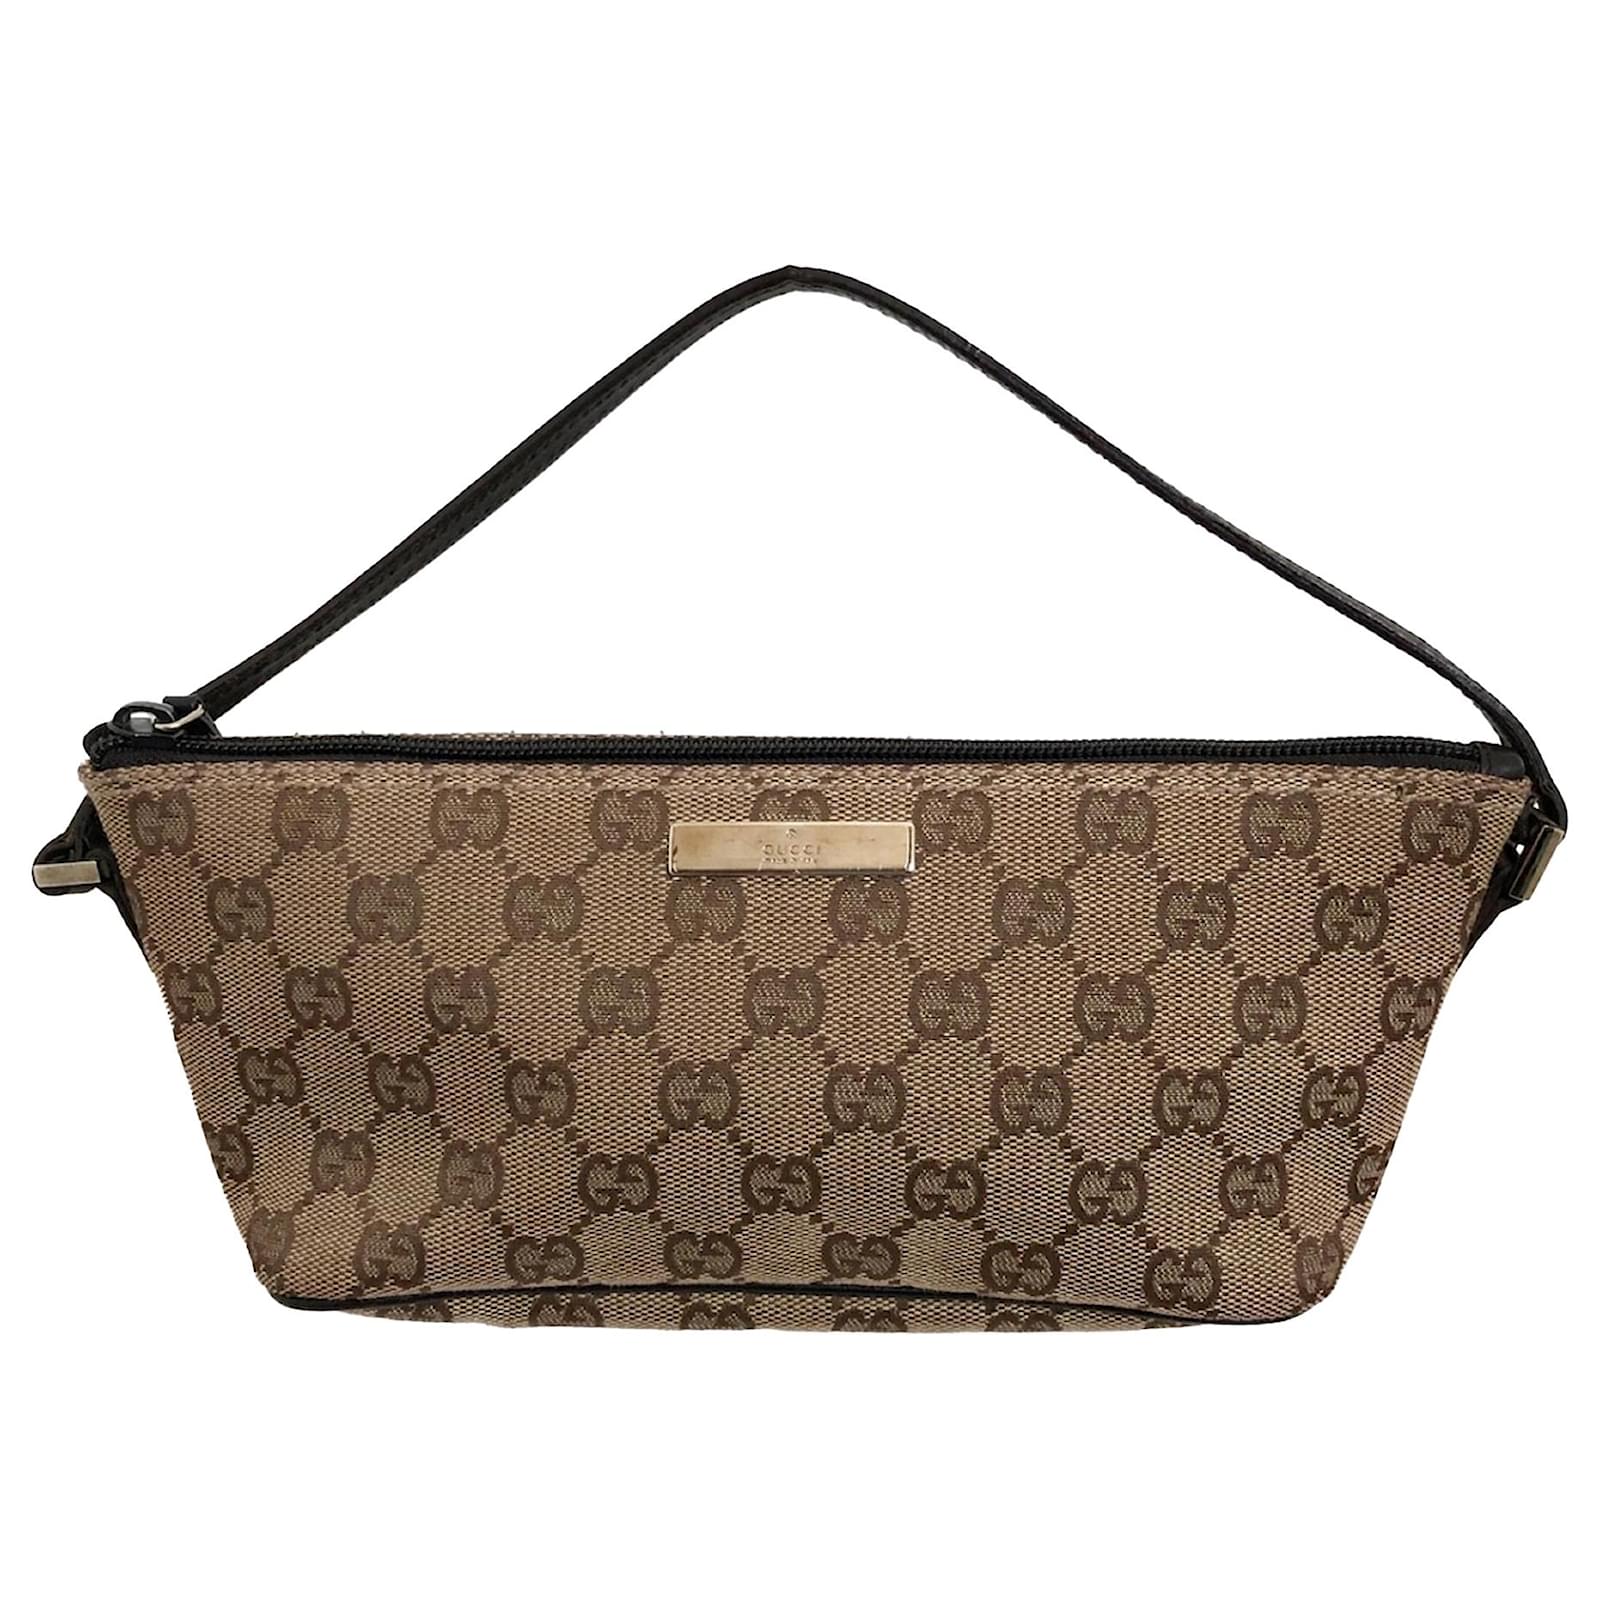 Gucci GG Canvas and Leather Boat Pochette Bag Beige/Brown